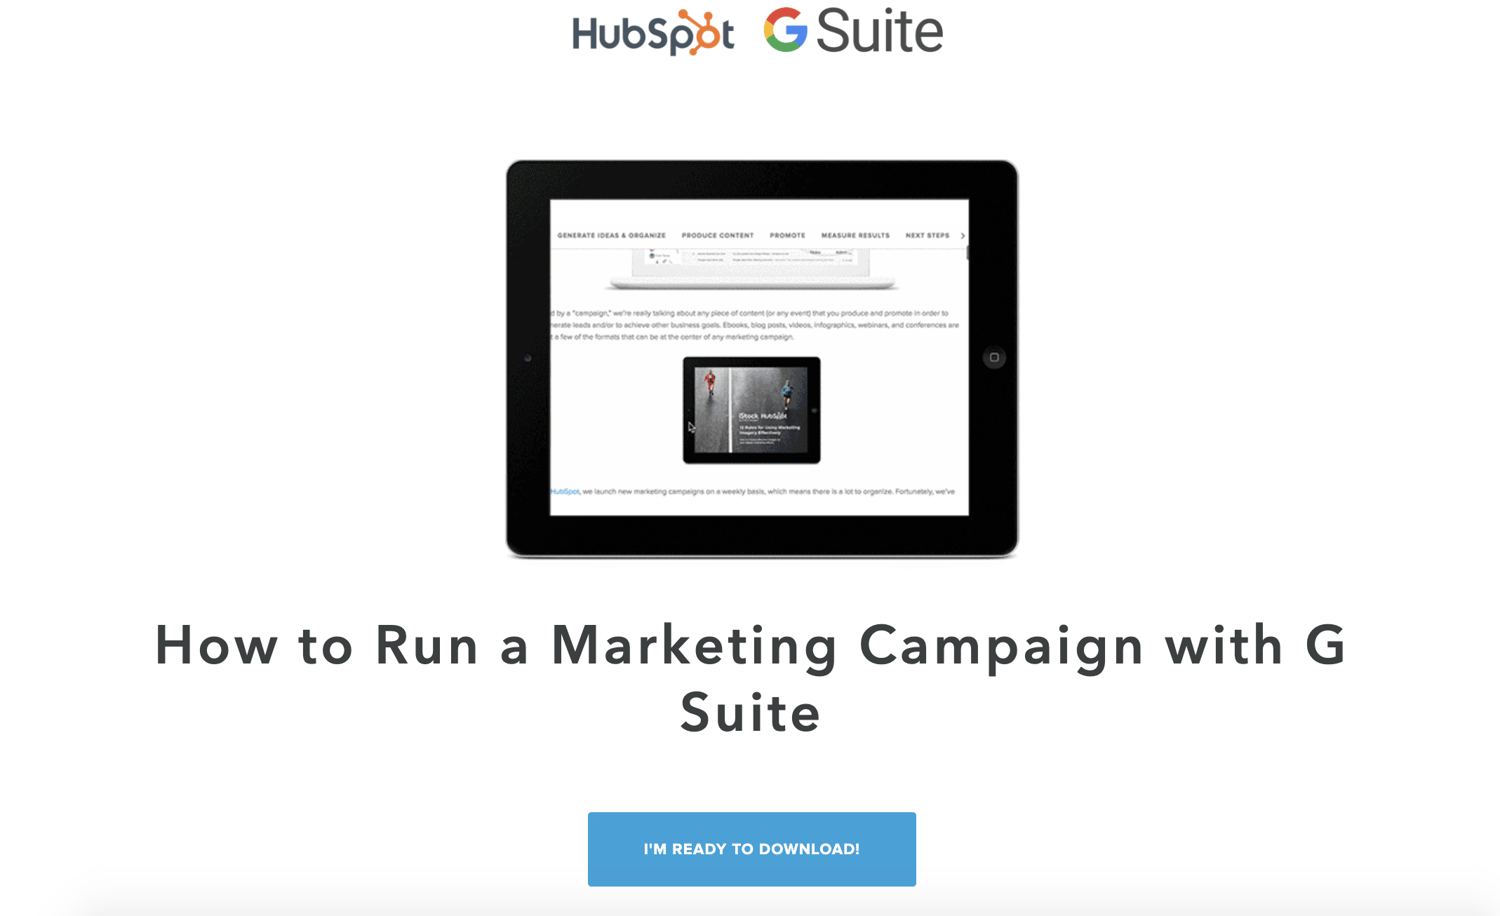 example of a shared landing page for a co-marketing campaign